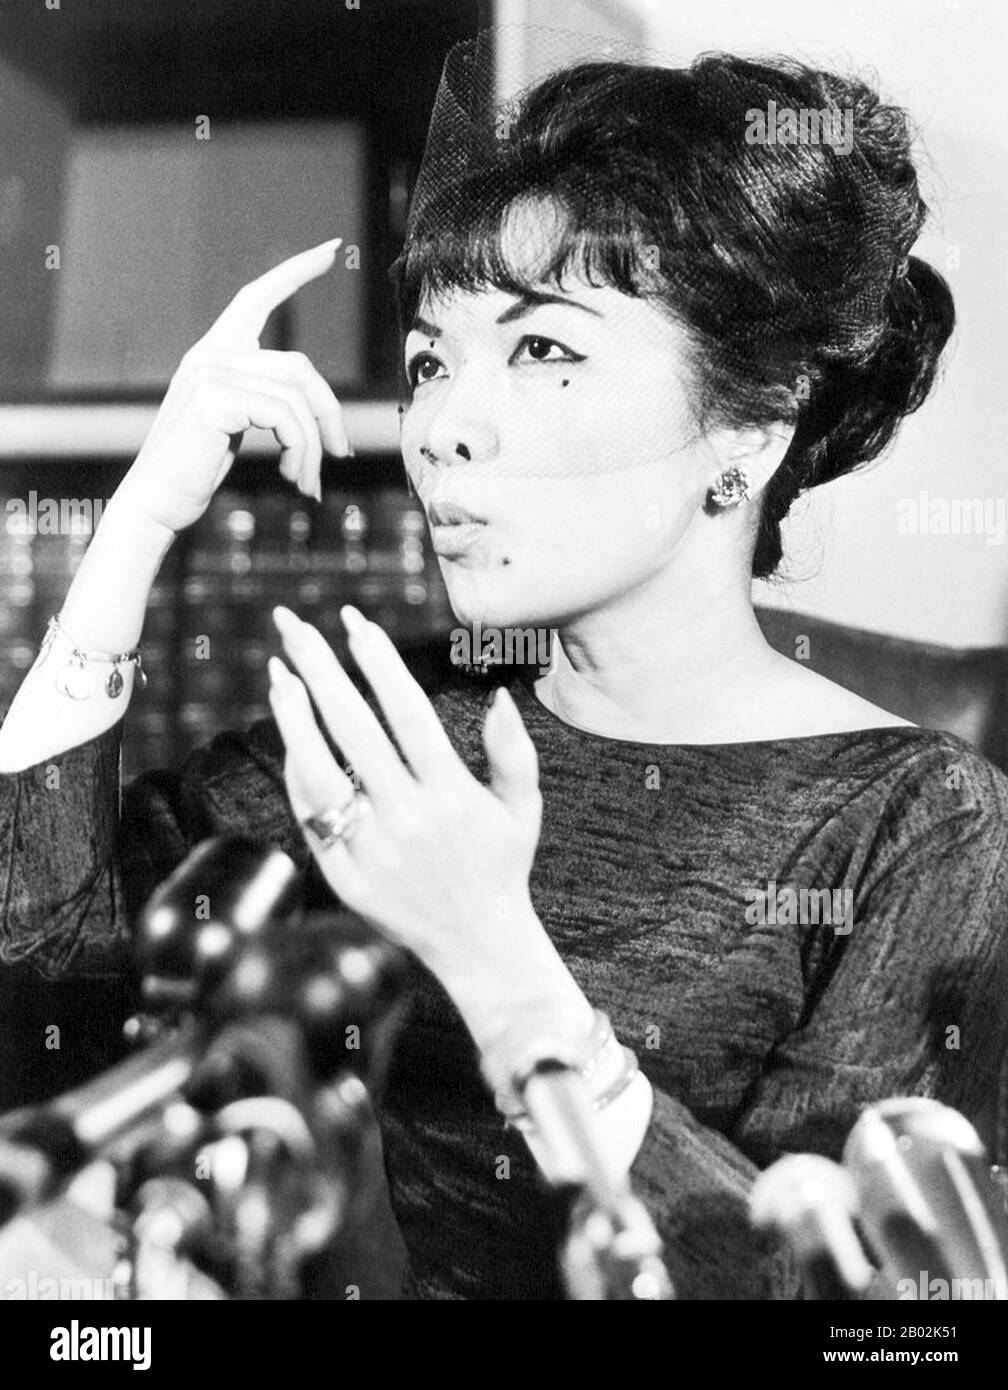 Tran Le Xuan (born April 15, 1924 in Hanoi, Vietnam), popularly known as Madame Nhu but more properly Madame Ngo Dinh Nhu, was considered the First Lady of South Vietnam from 1955 to 1963. She was the wife of Ngo Dinh Nhu, brother and chief adviser to President Ngo Dinh Diem.  As Diem was a lifelong bachelor, and because the Nhus lived in the Independence Palace, she was considered to be the First Lady. Diem often appointed relatives to high positions, so her father became the ambassador to the United States while her mother, a former beauty queen, was South Vietnam's observer at the United Na Stock Photo